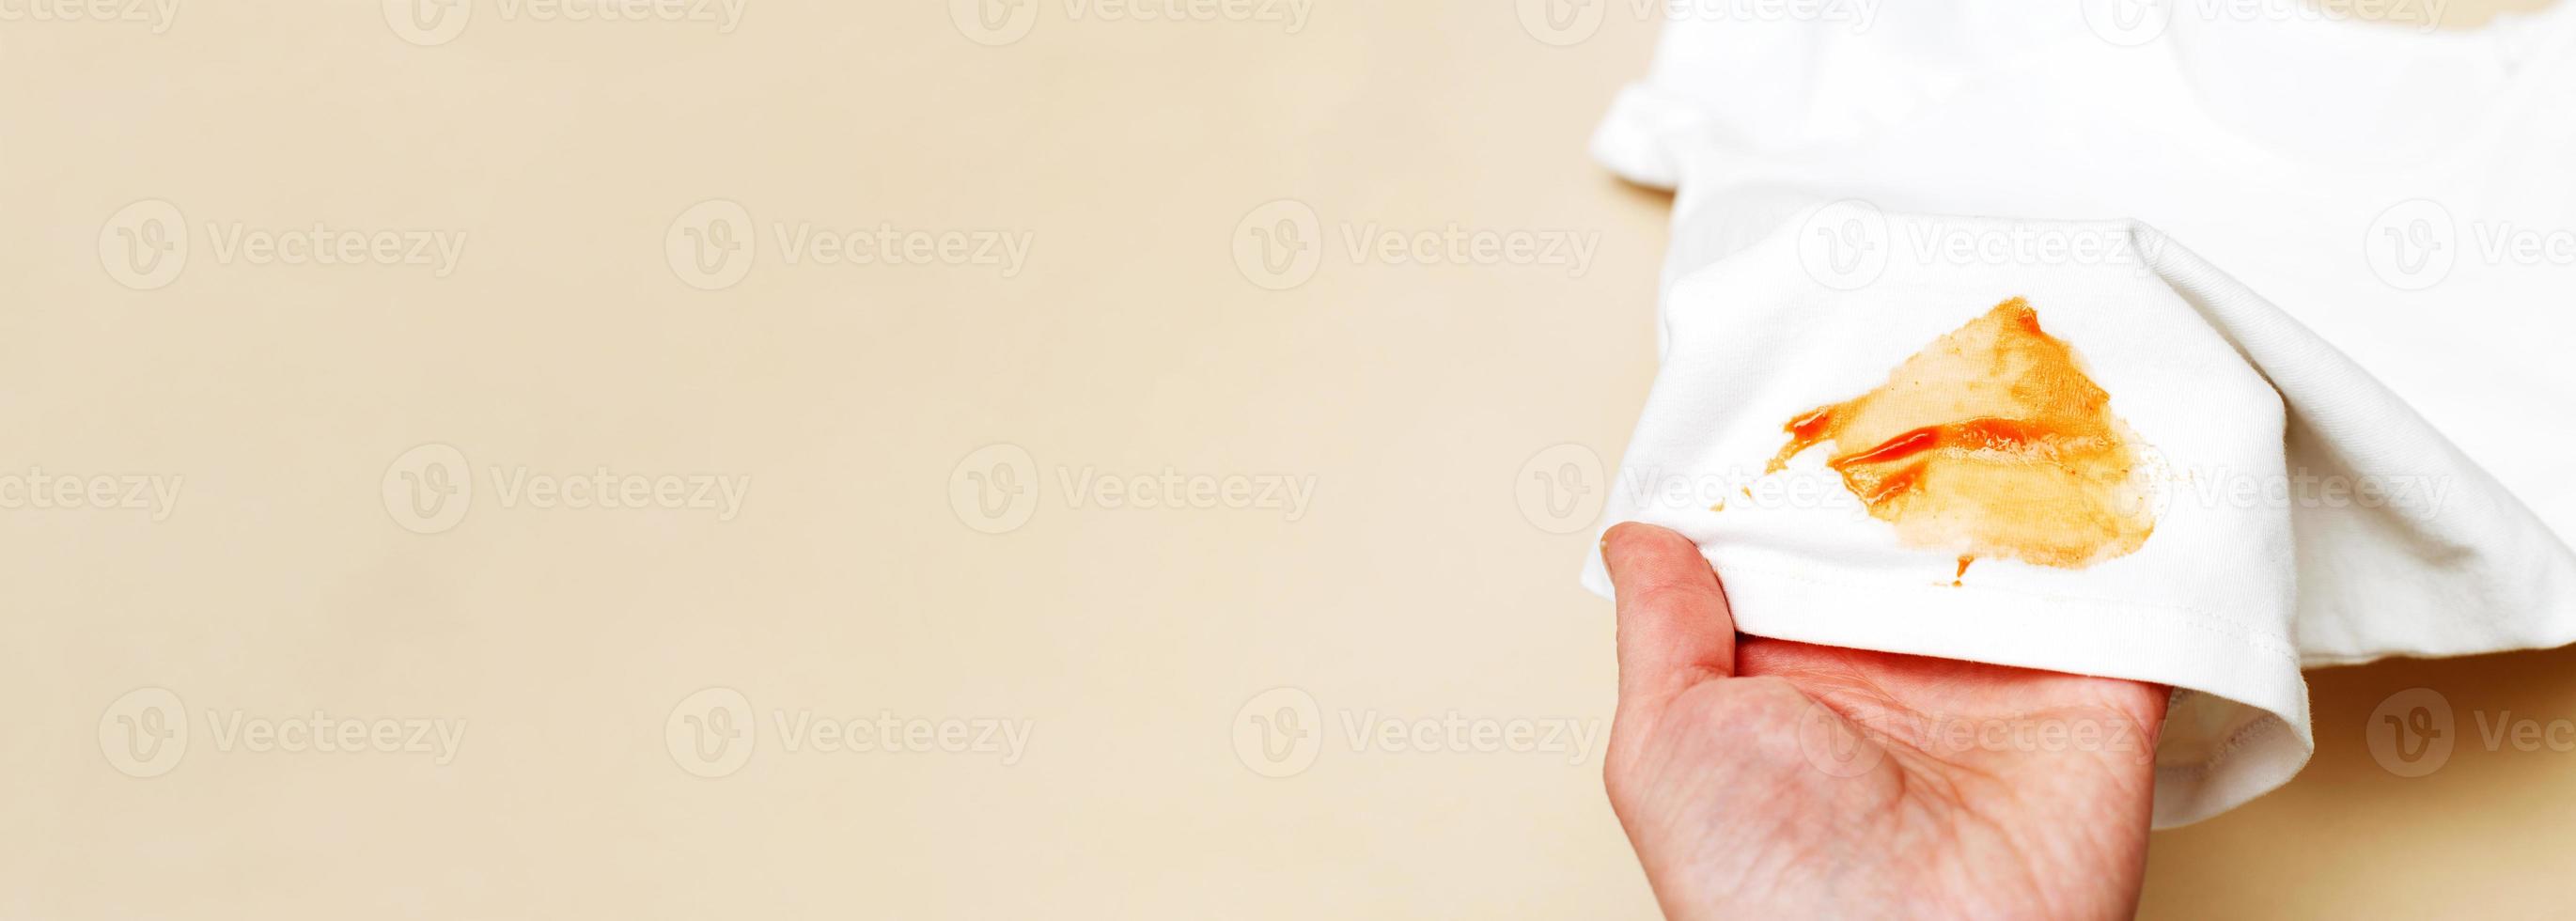 womans hand hold white shirt clothes with ketchup stain on a beige background. banner photo